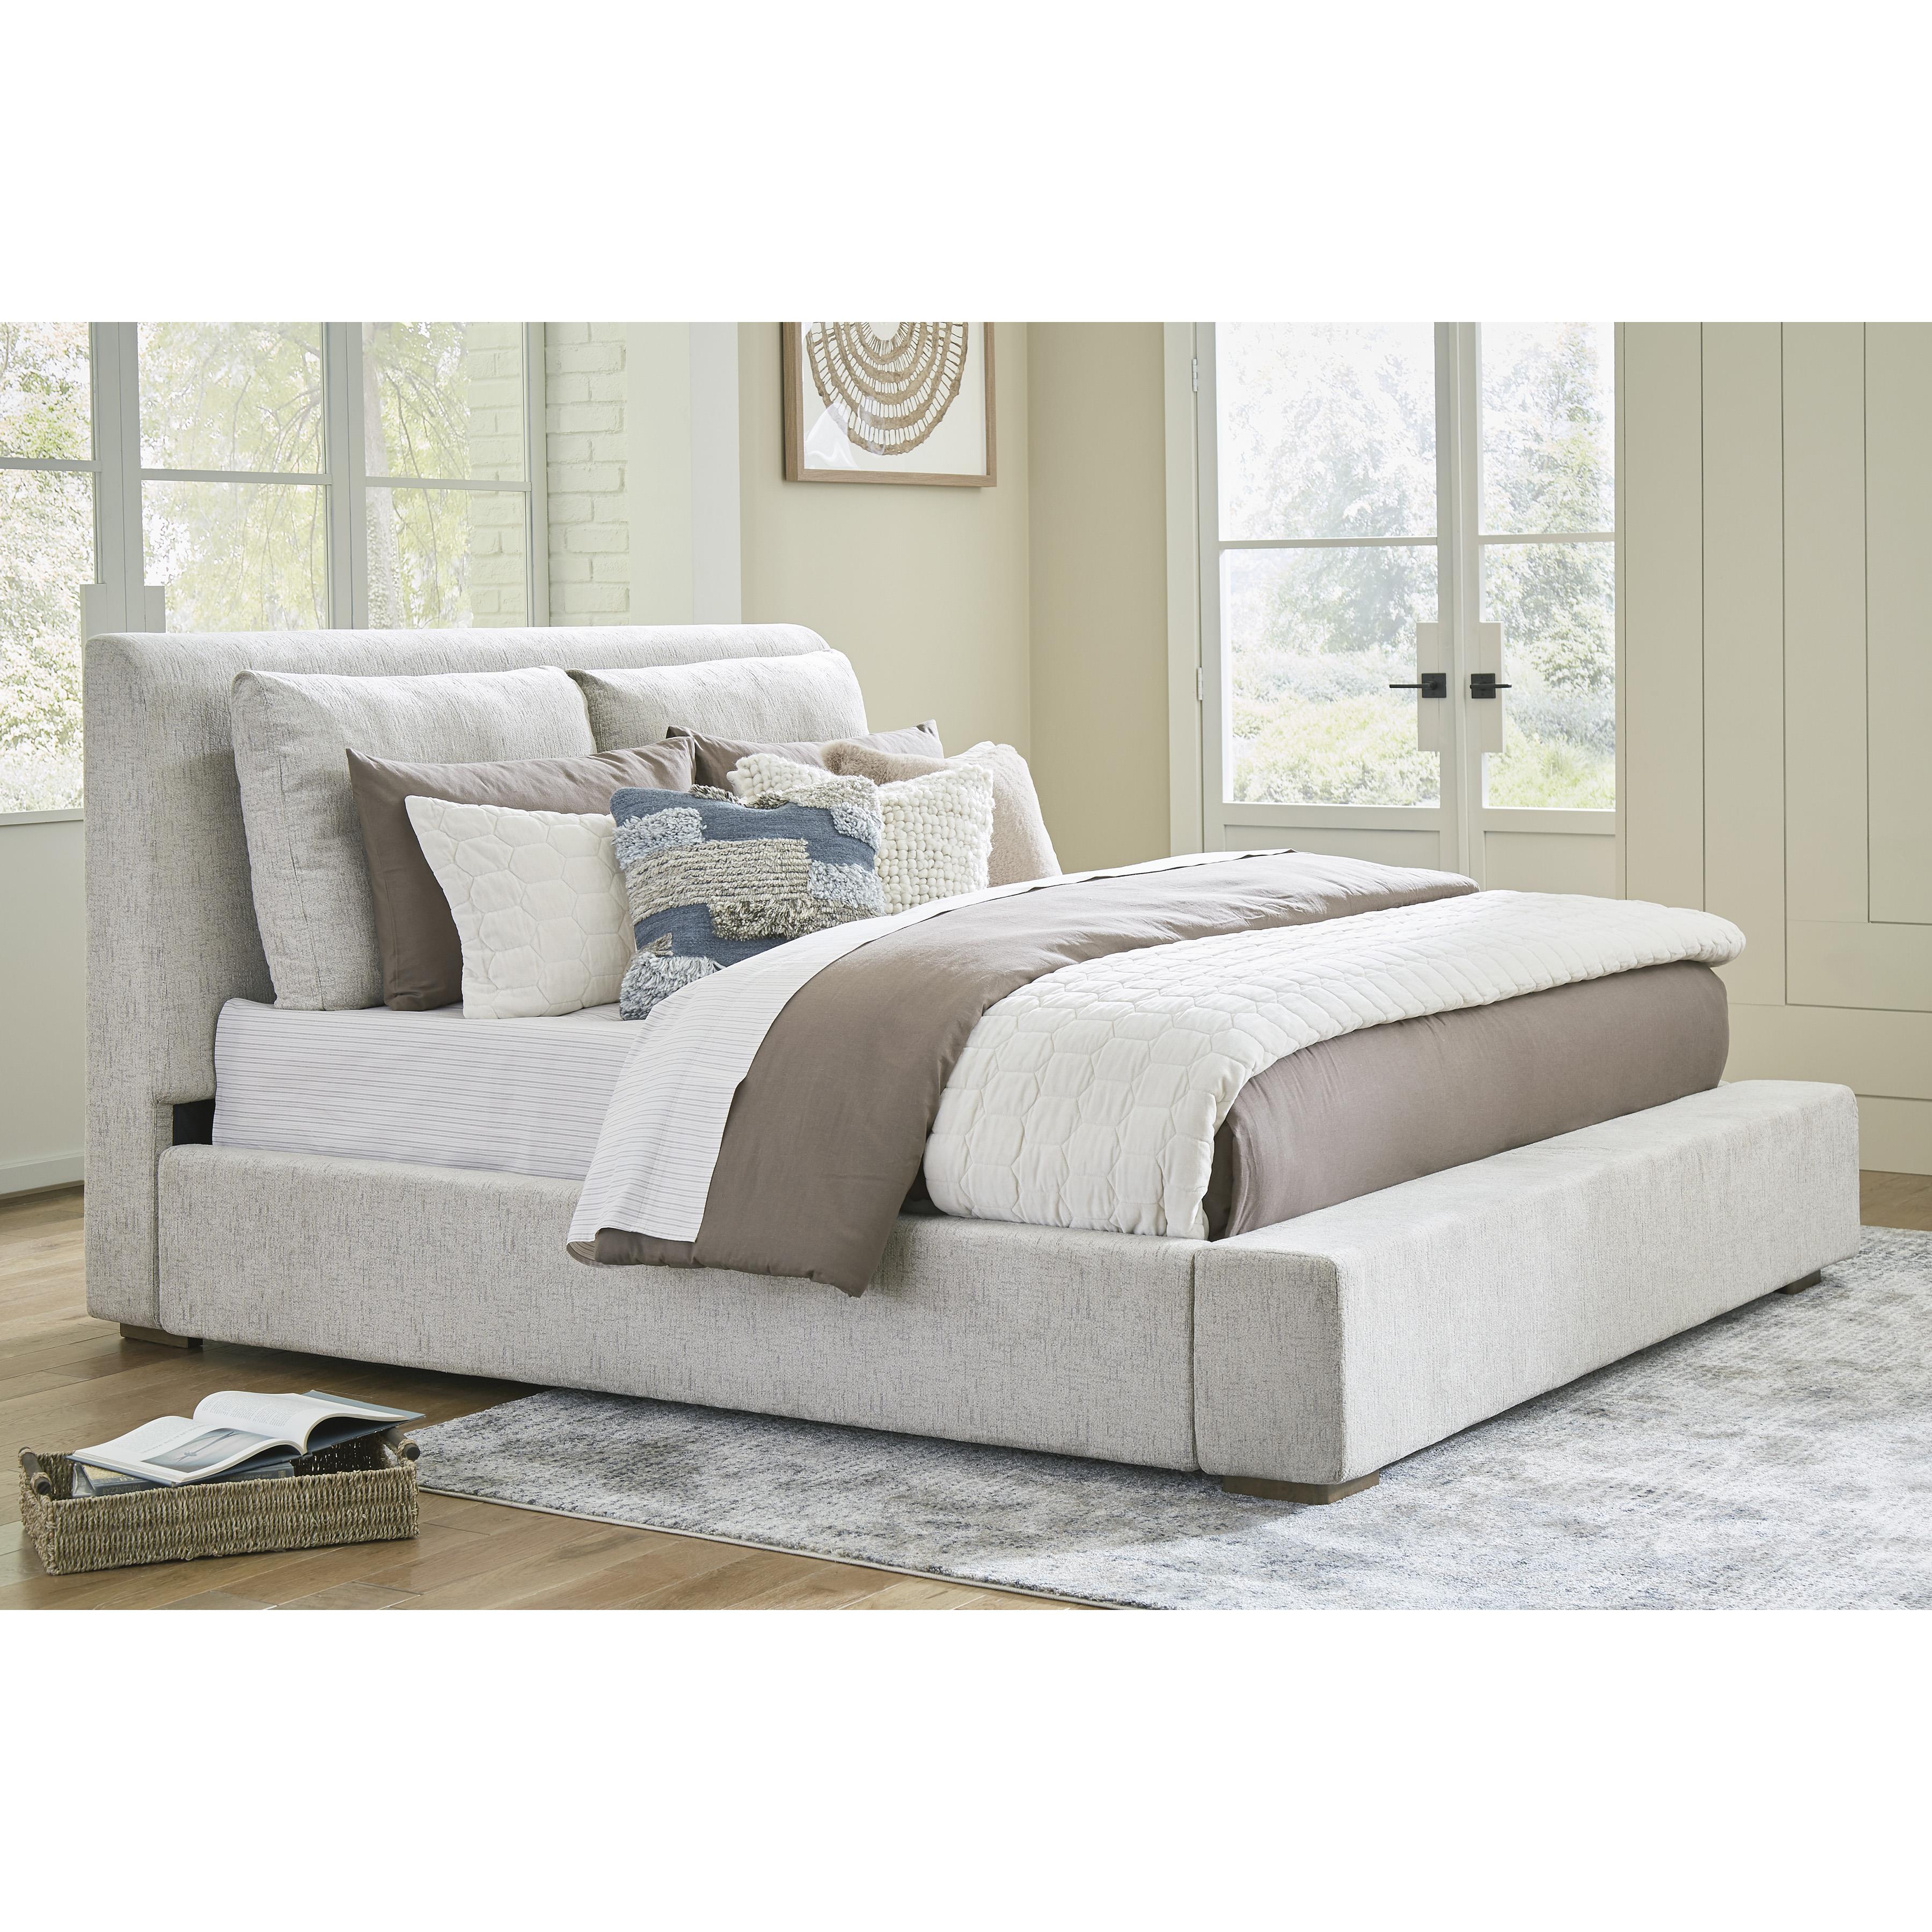 Signature Design by Ashley Cabalynn King Upholstered Bed B974-78/B974-76 IMAGE 5